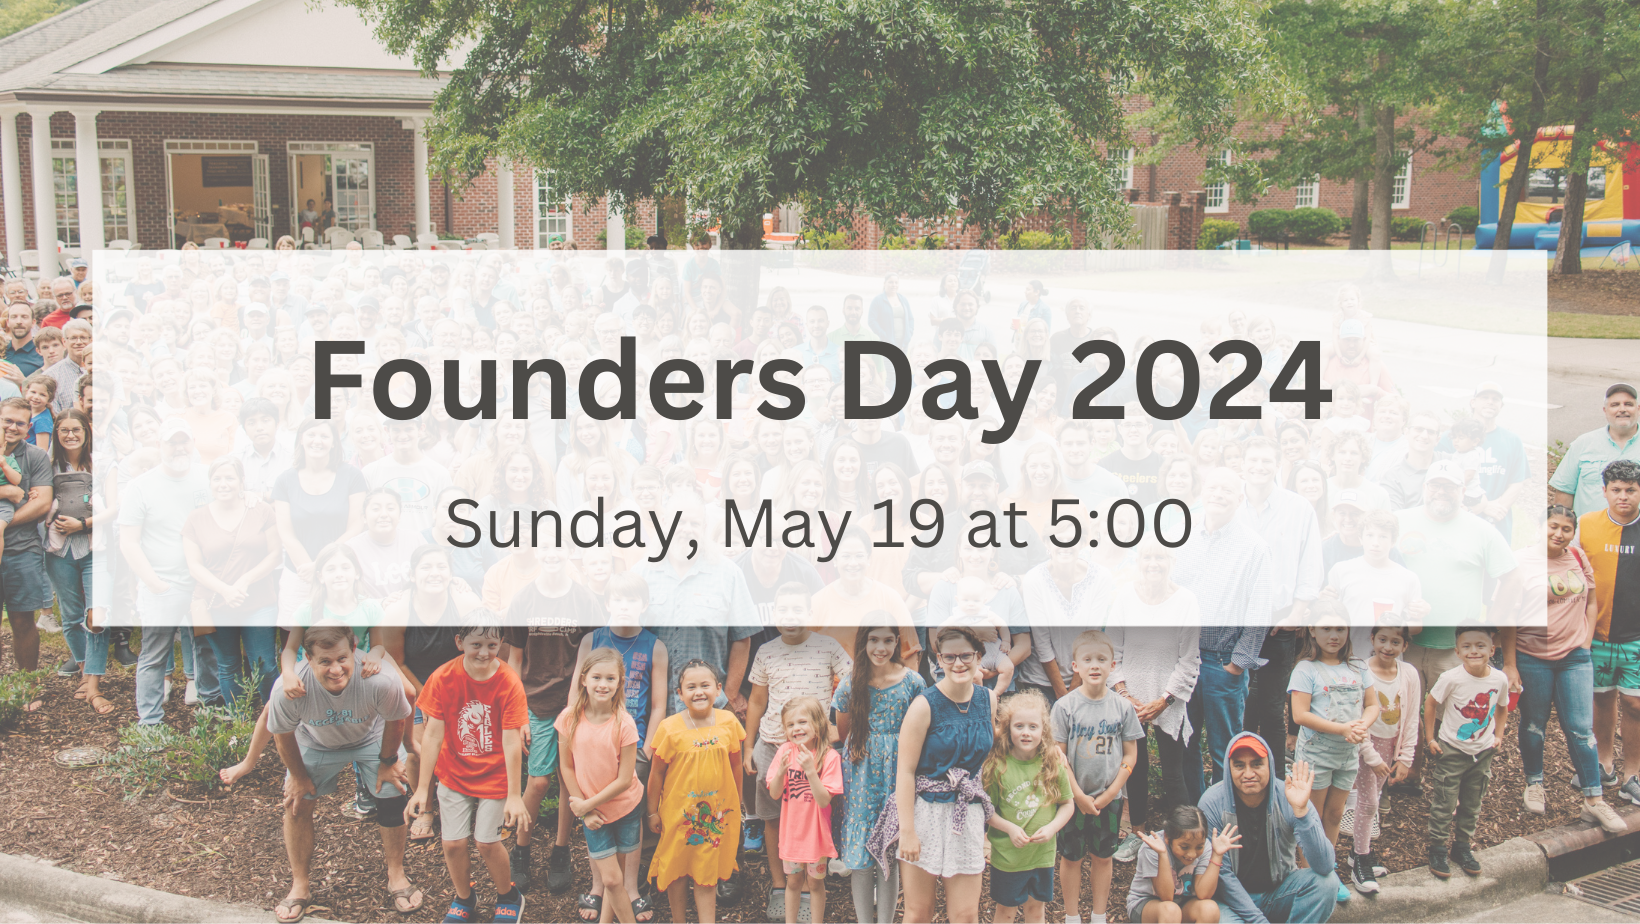 Founder's Day Image-2